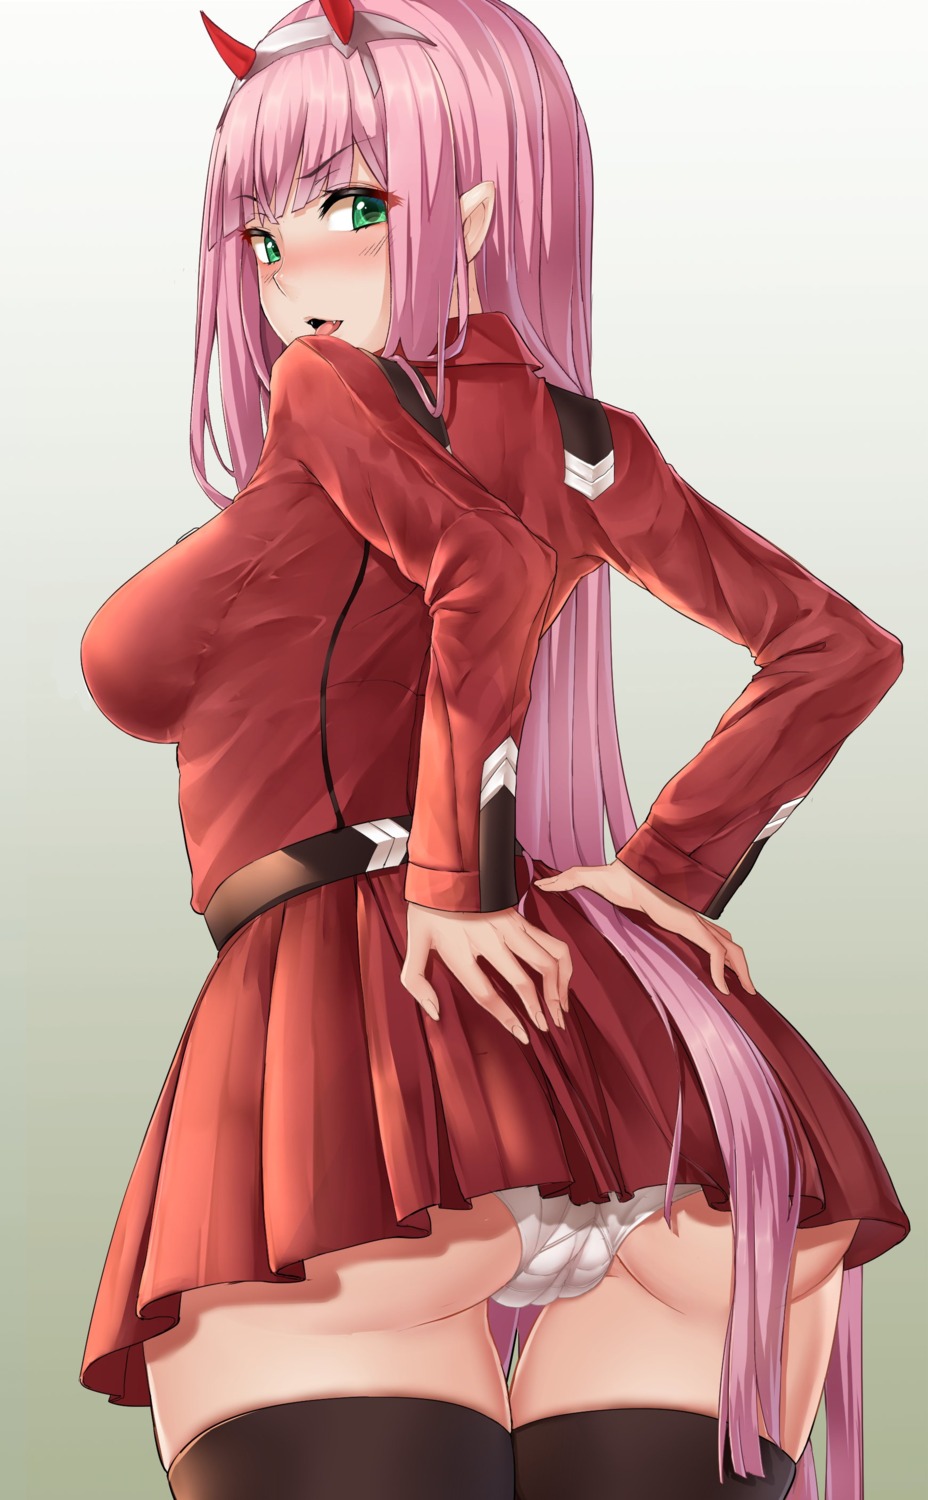 ass cameltoe darling_in_the_franxx horns oxenia pantsu thighhighs uniform zero_two_(darling_in_the_franxx)